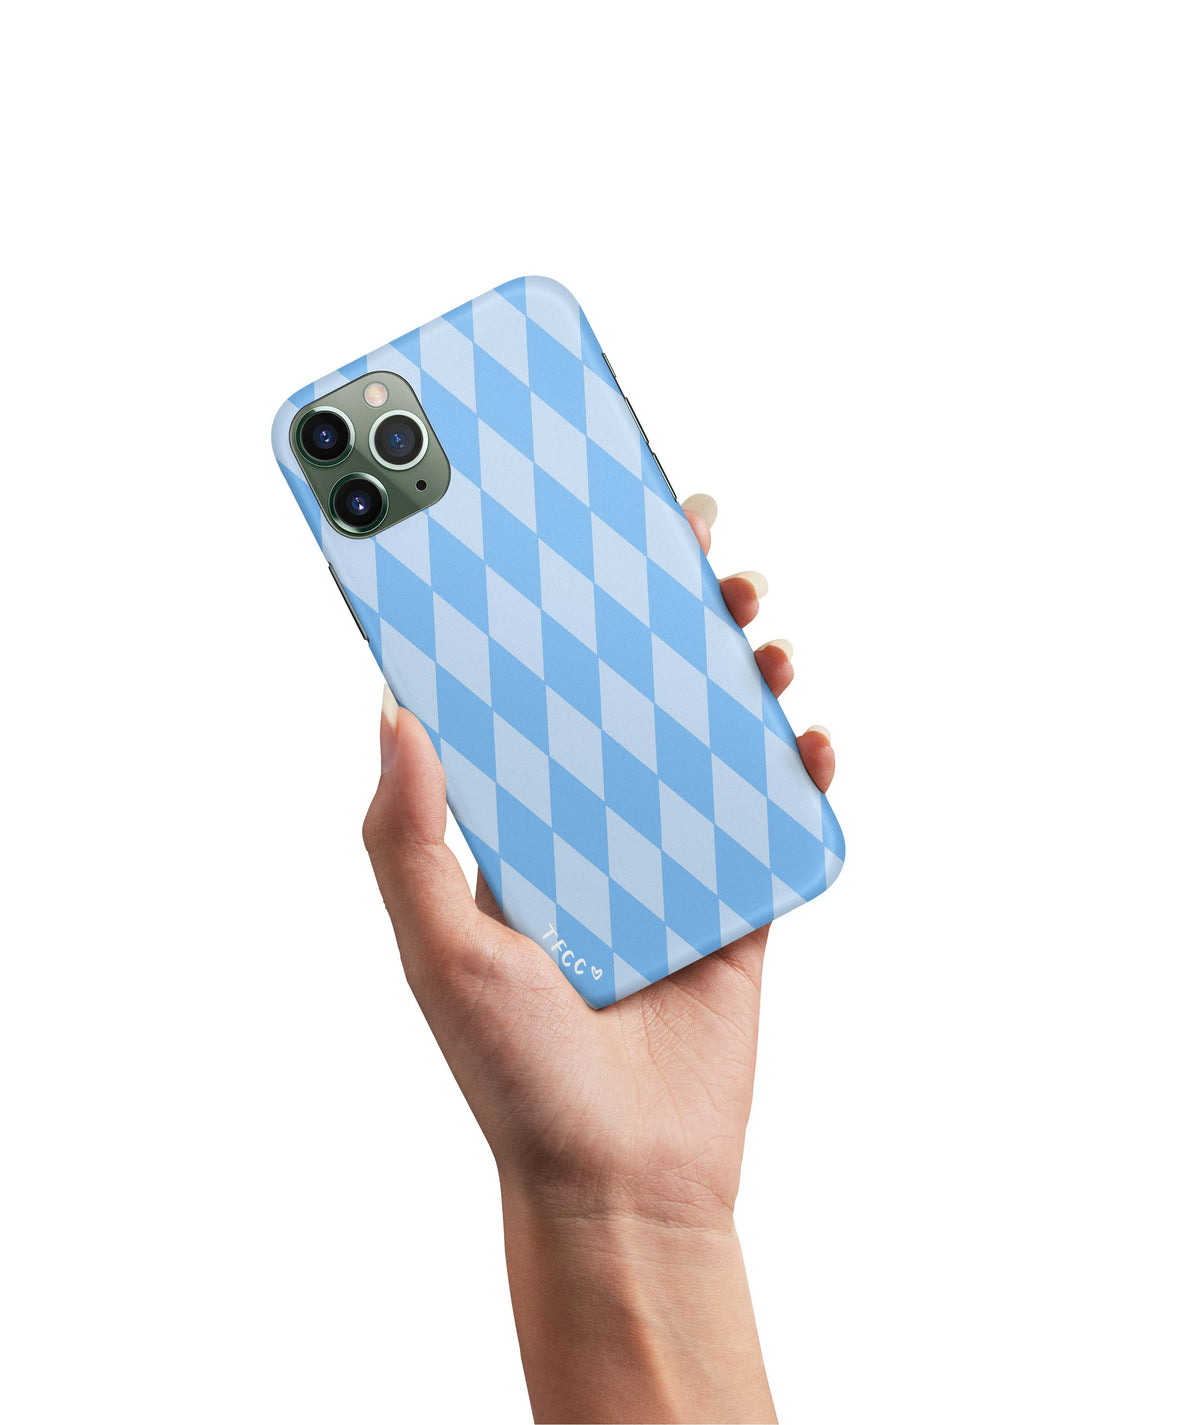 BLUE CHECK CASE - thefonecasecompany